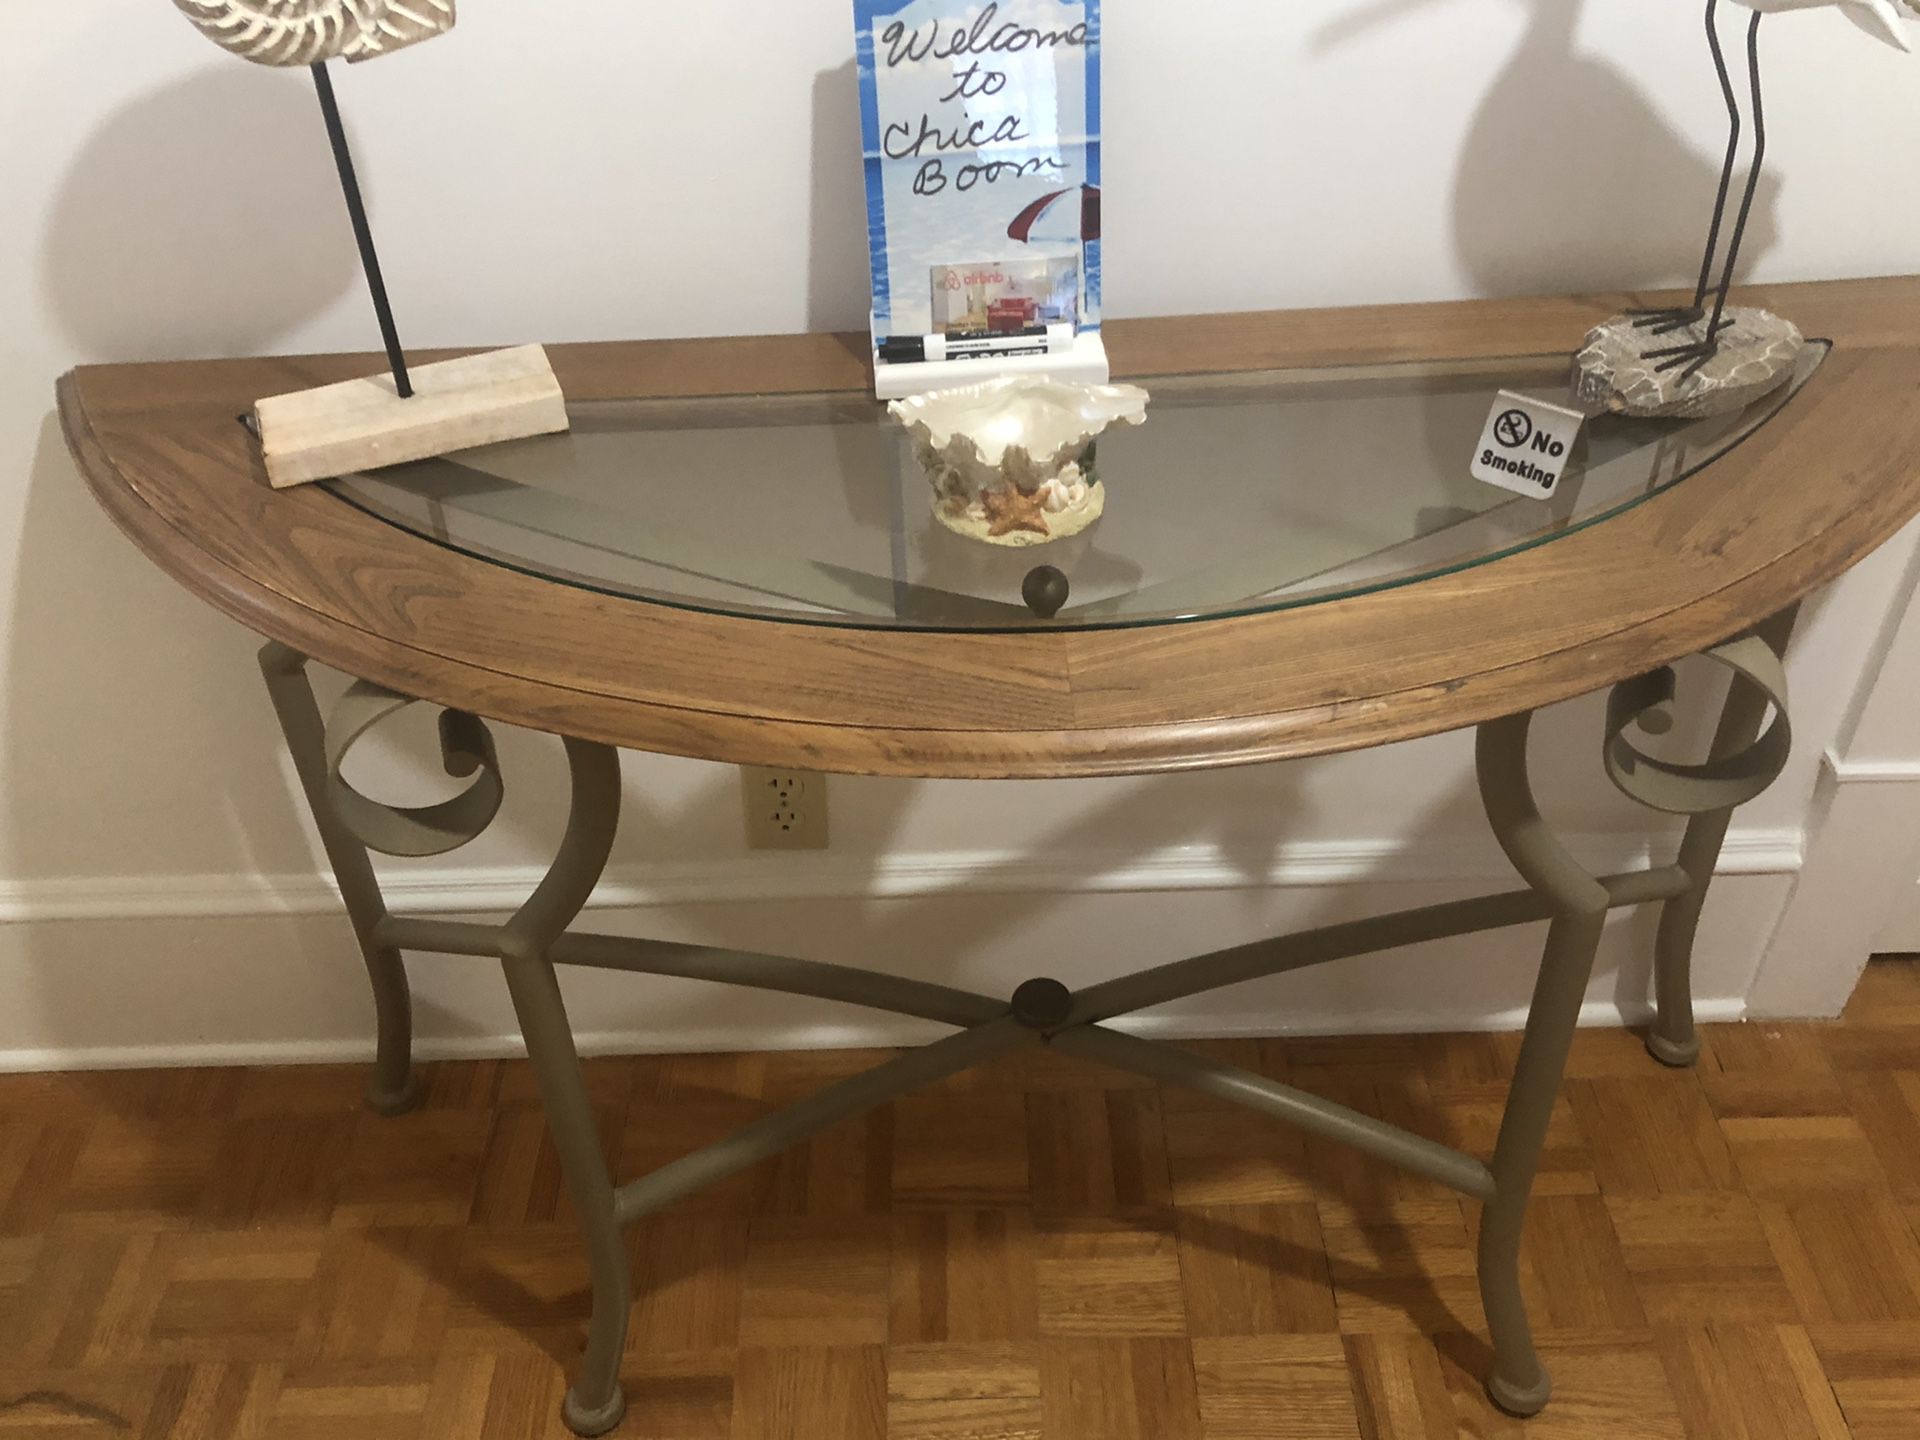 Half moon table with shelve over it. Shelve is good to hang hats, keys or umbrellas